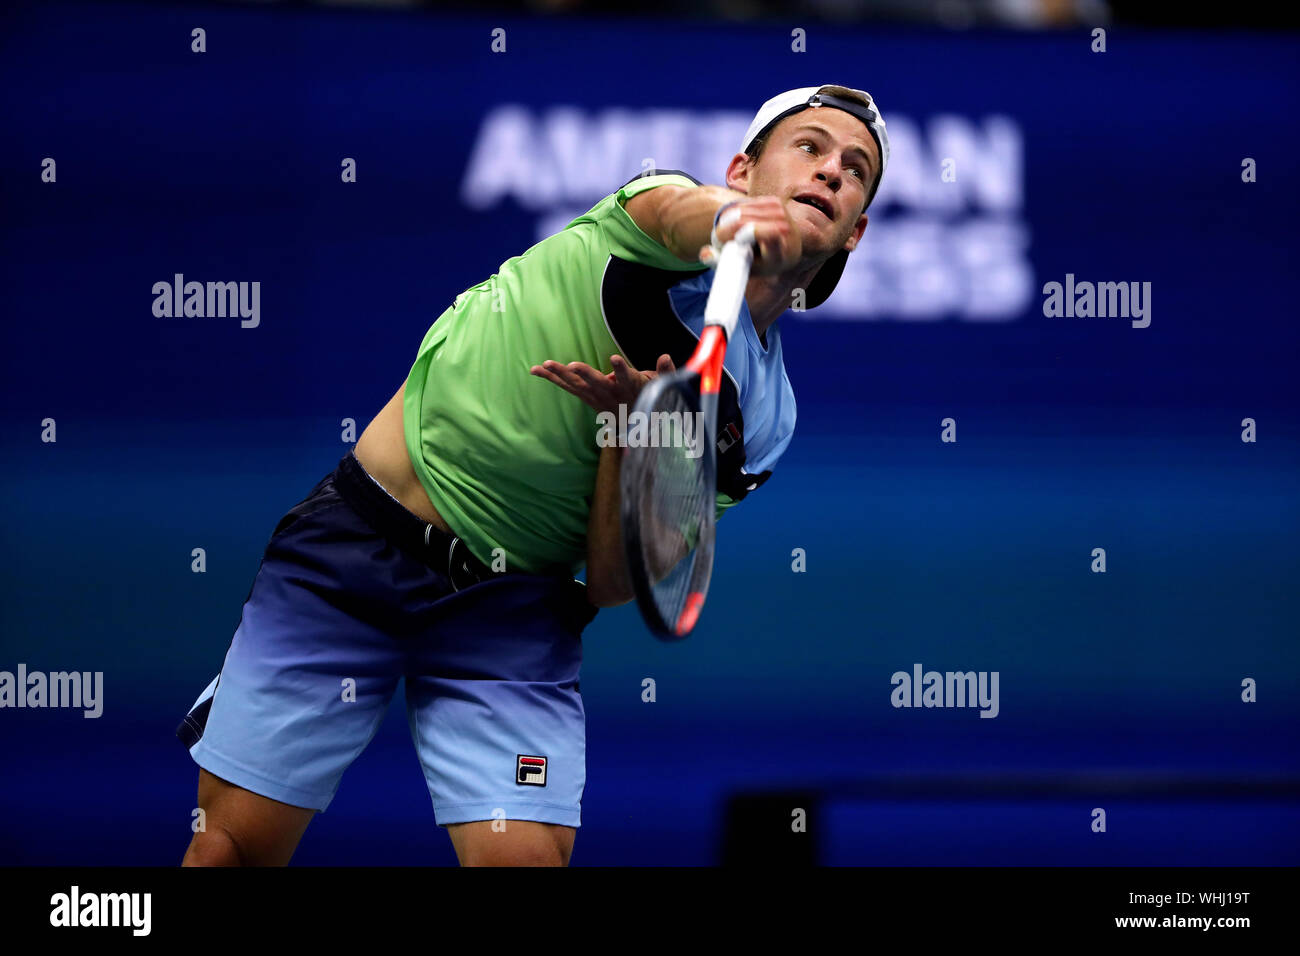 New York, United States. 02nd Sep, 2019. Flushing Meadows, New York, United States - September 2, 2019. Diego Schwartzman of Argentina serving to Number 6 seed Alexander Zverev of Germany during their fourth round match against at the US Open today. Credit: Adam Stoltman/Alamy Live News Stock Photo